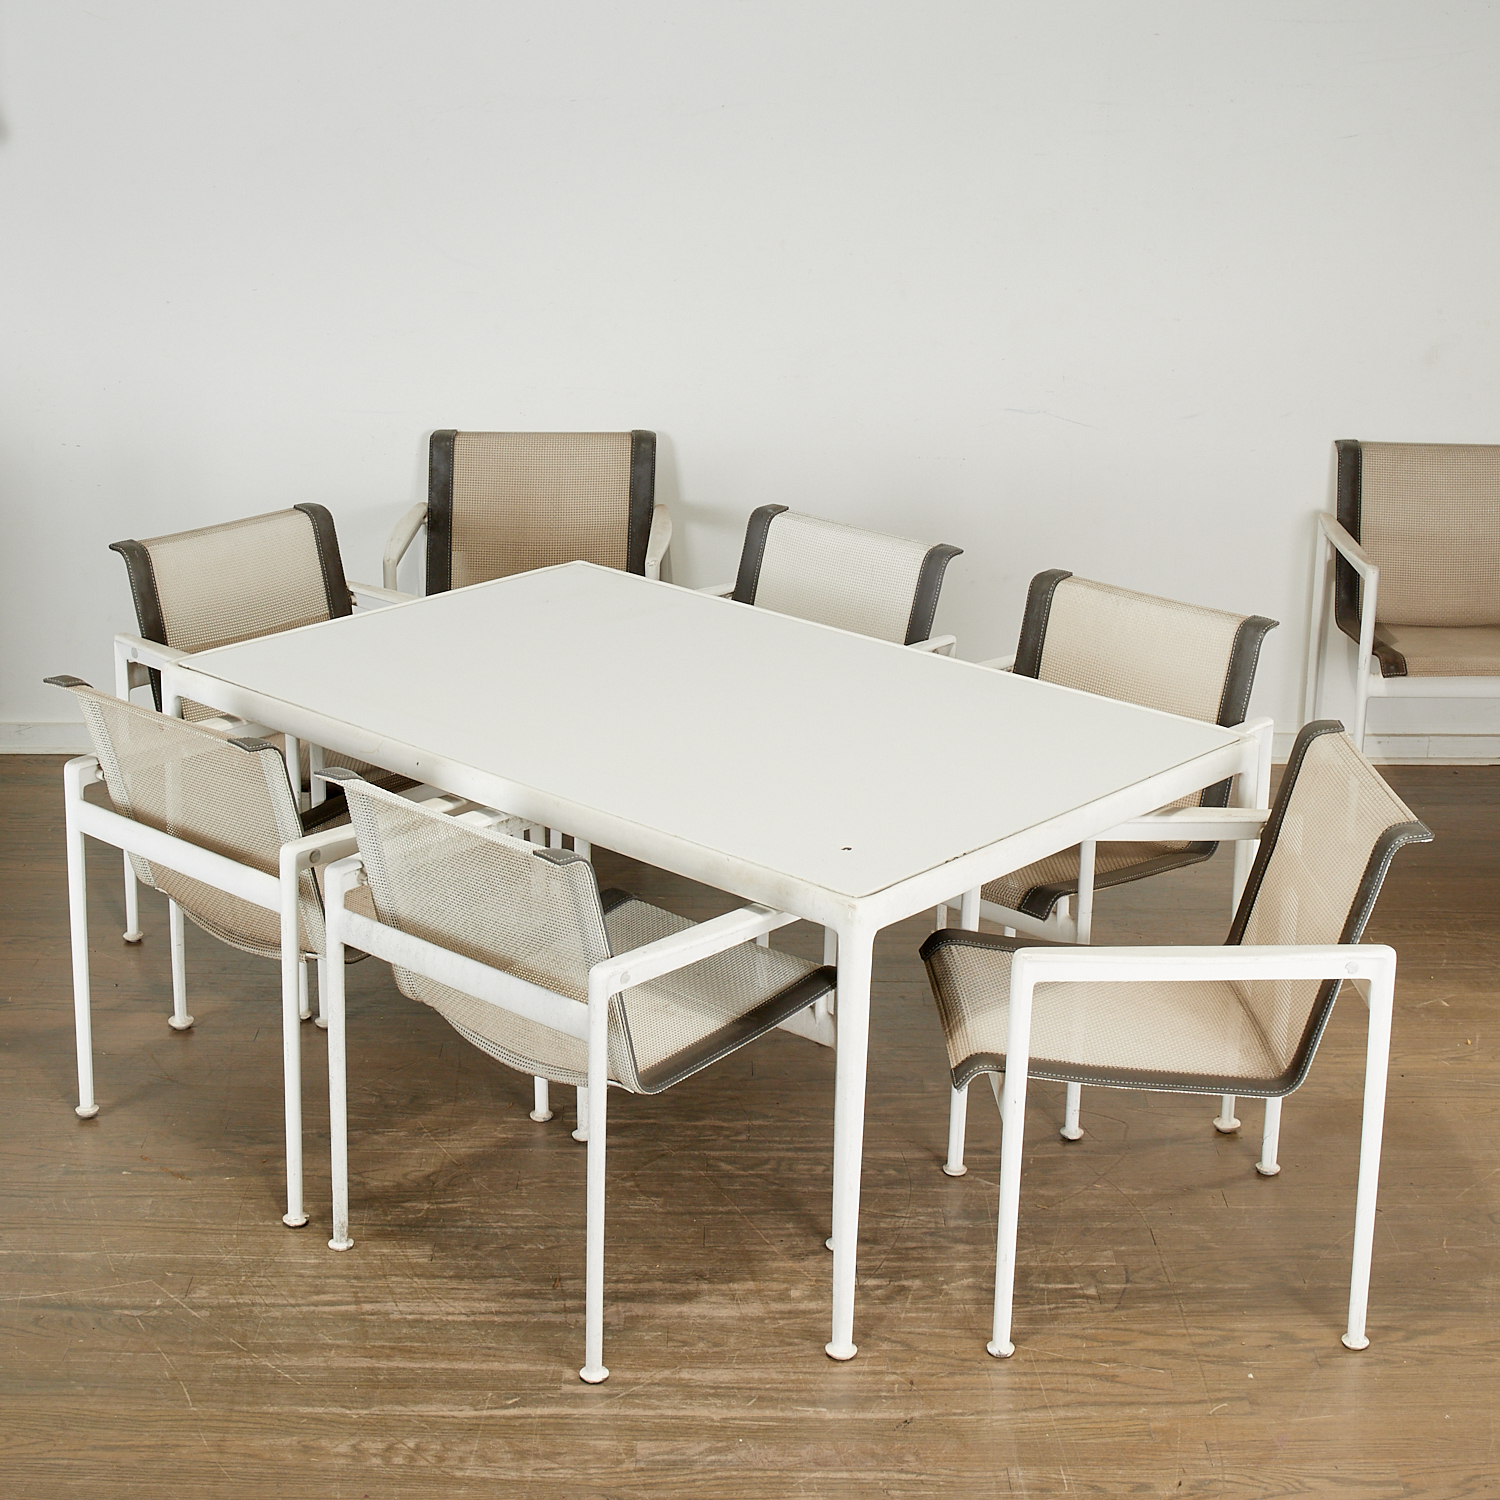 RICHARD SCHULTZ, DINING TABLE AND